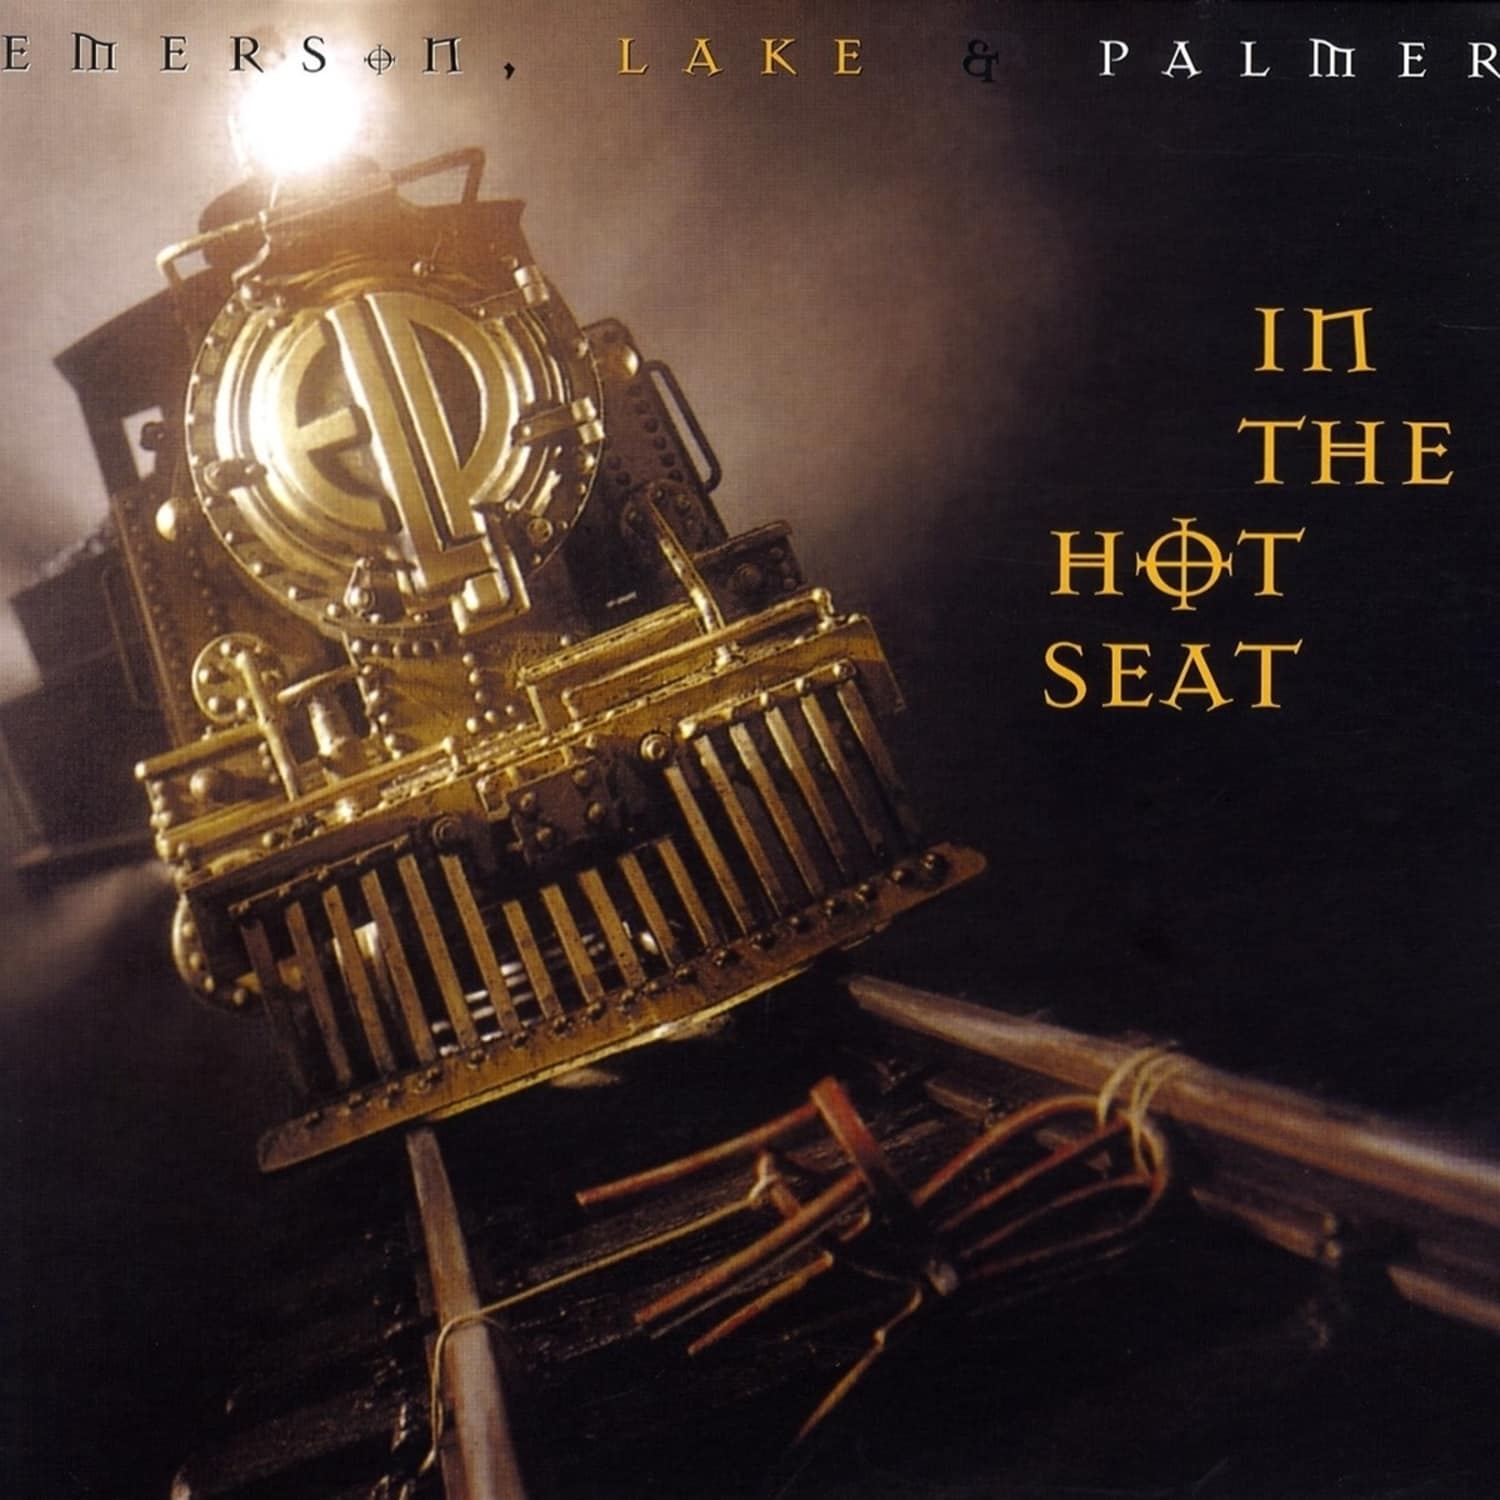 Lake Emerson & Palmer - IN THE HOT SEAT 